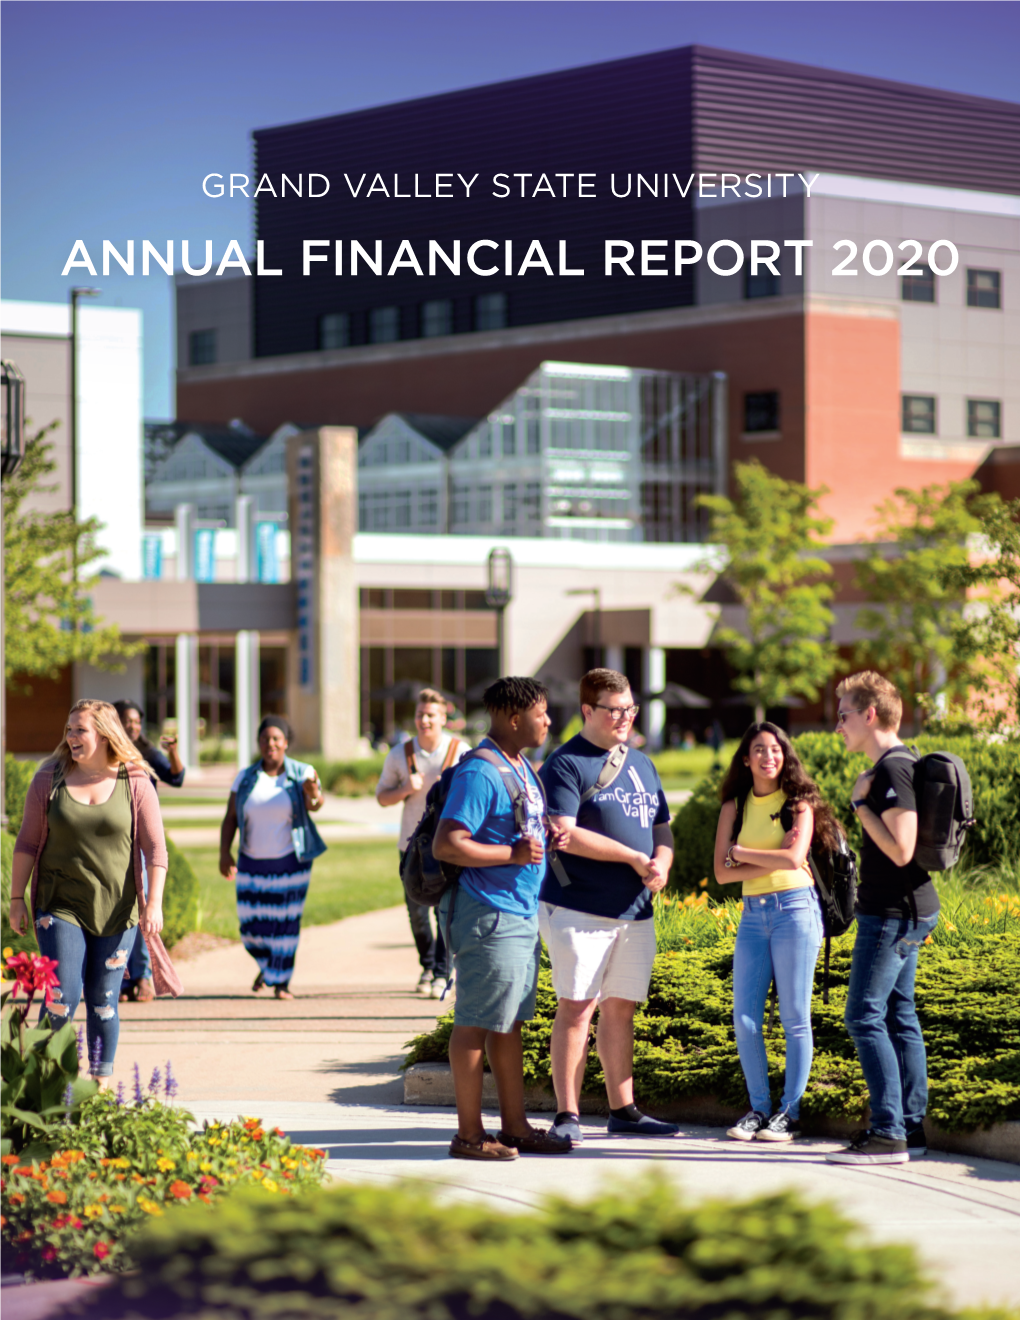 ANNUAL FINANCIAL REPORT 2020 Grand Valley State University